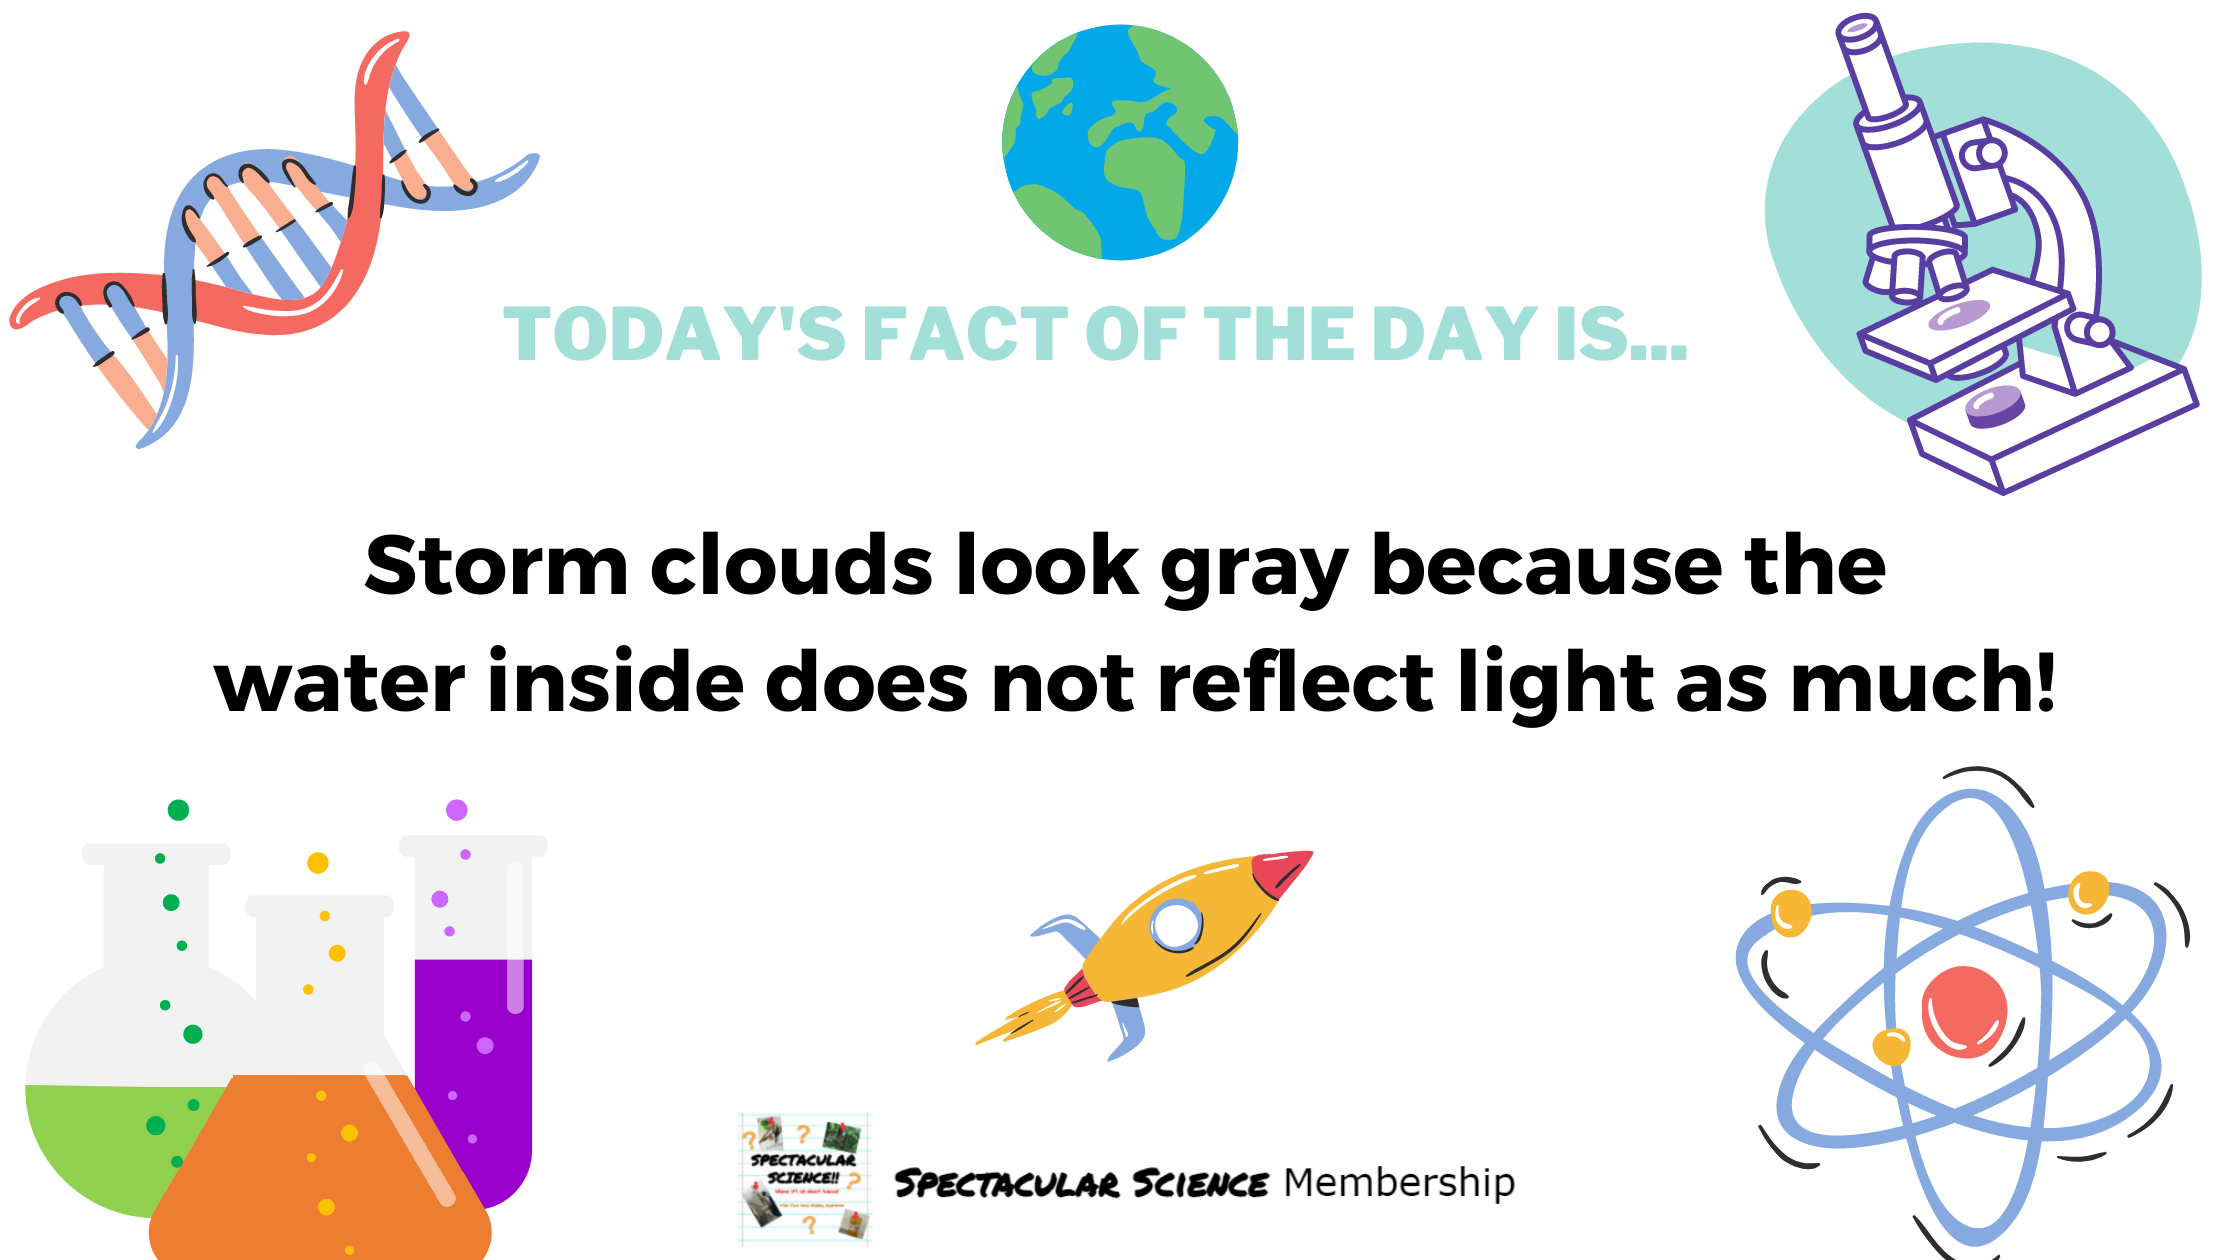 Fact of the Day Image Dec. 13th